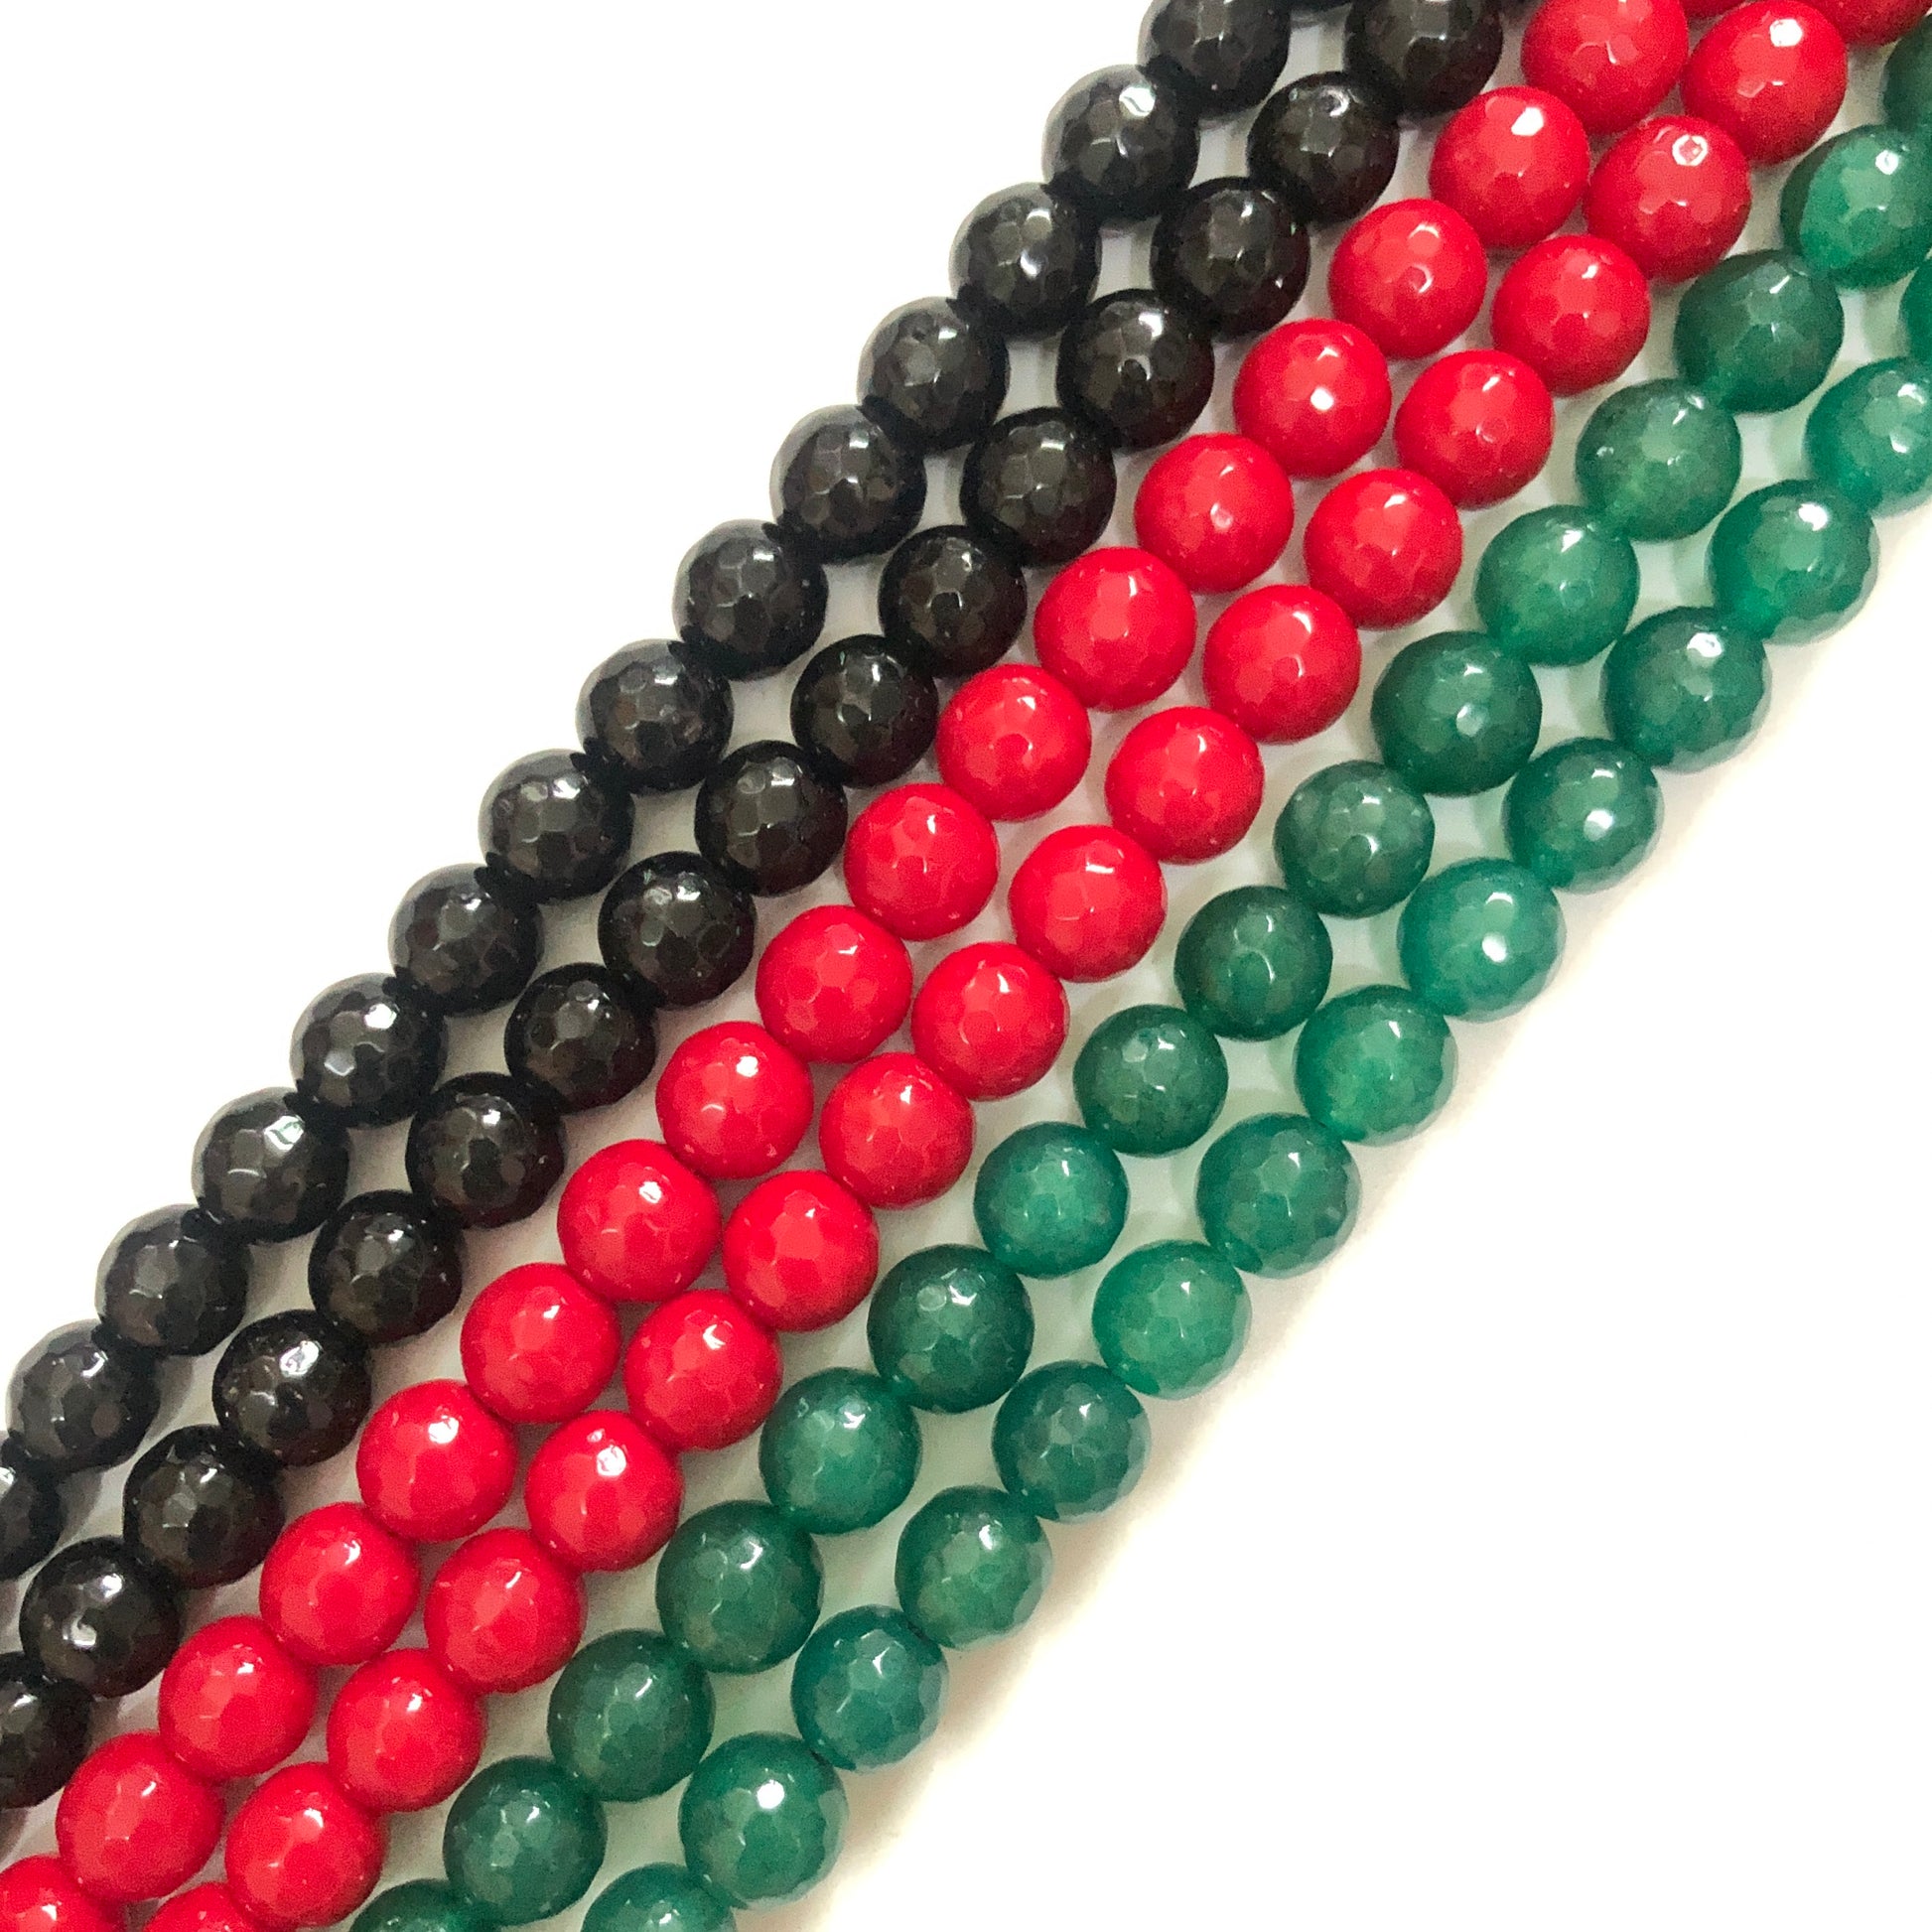 2 Strands/lot 10mm Yellow Green Red Black Jade Faceted Stone Beads for Black History Month Juneteenth Awareness Stone Beads Juneteenth & Black History Month Awareness New Beads Arrivals Round Jade Beads Charms Beads Beyond